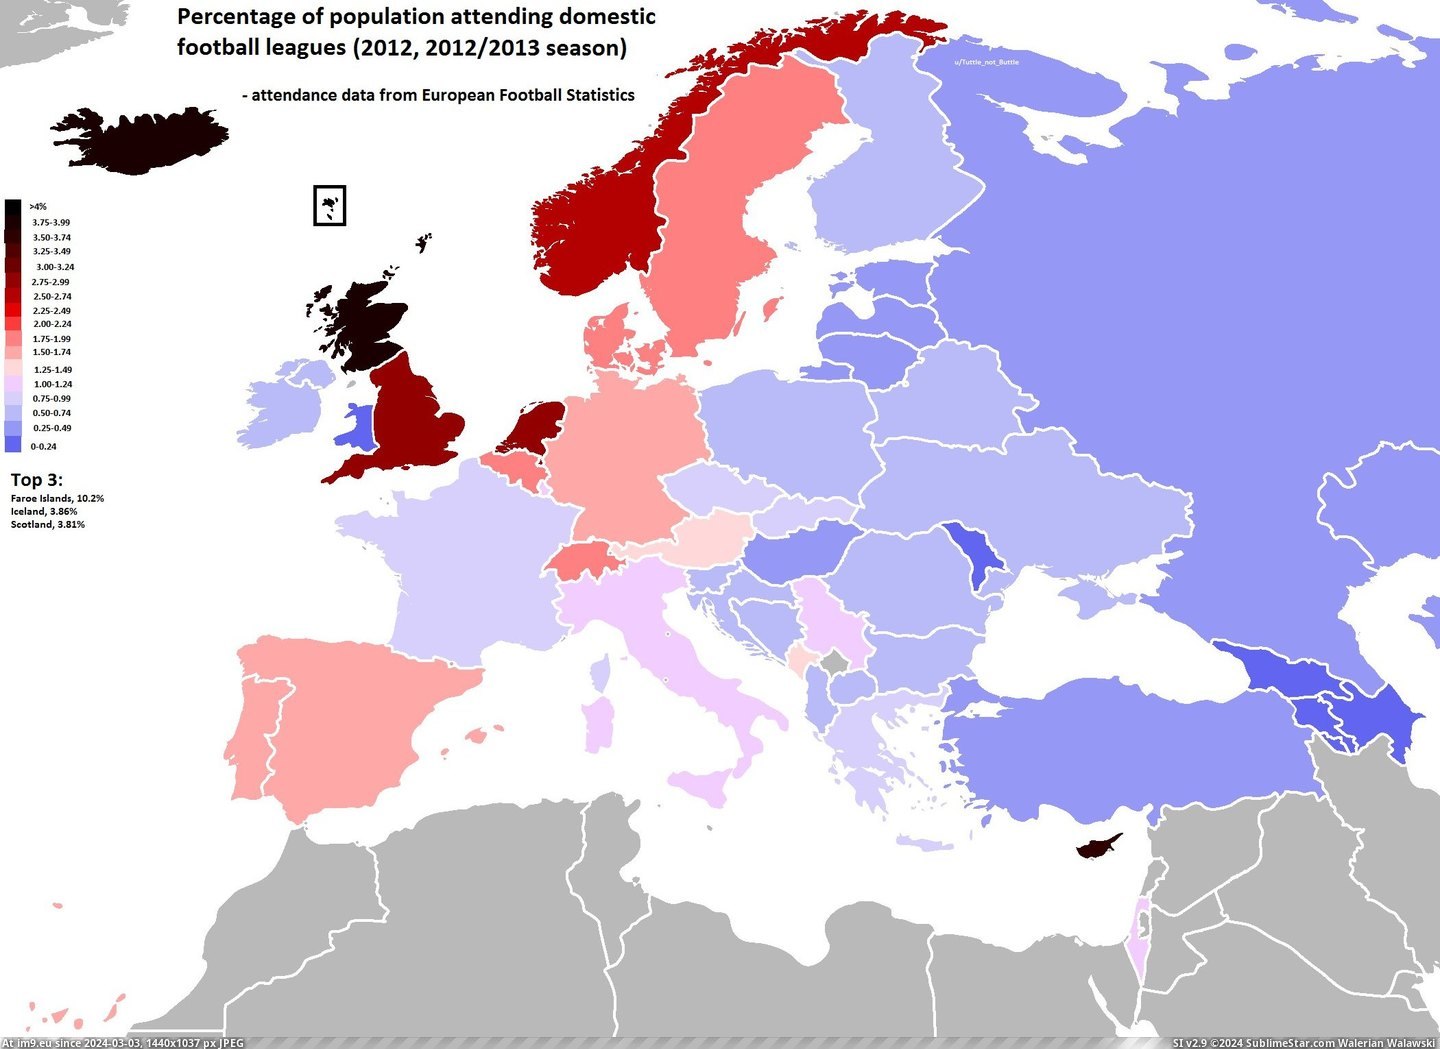 #European #Population #Football #Domestic #Leagues #Attending #Numbered #Percentage #Details #2100x1525 [Mapporn] Percentage of European population attending domestic football leagues (2100x1525) [OC] (details & numbered version Pic. (Bild von album My r/MAPS favs))